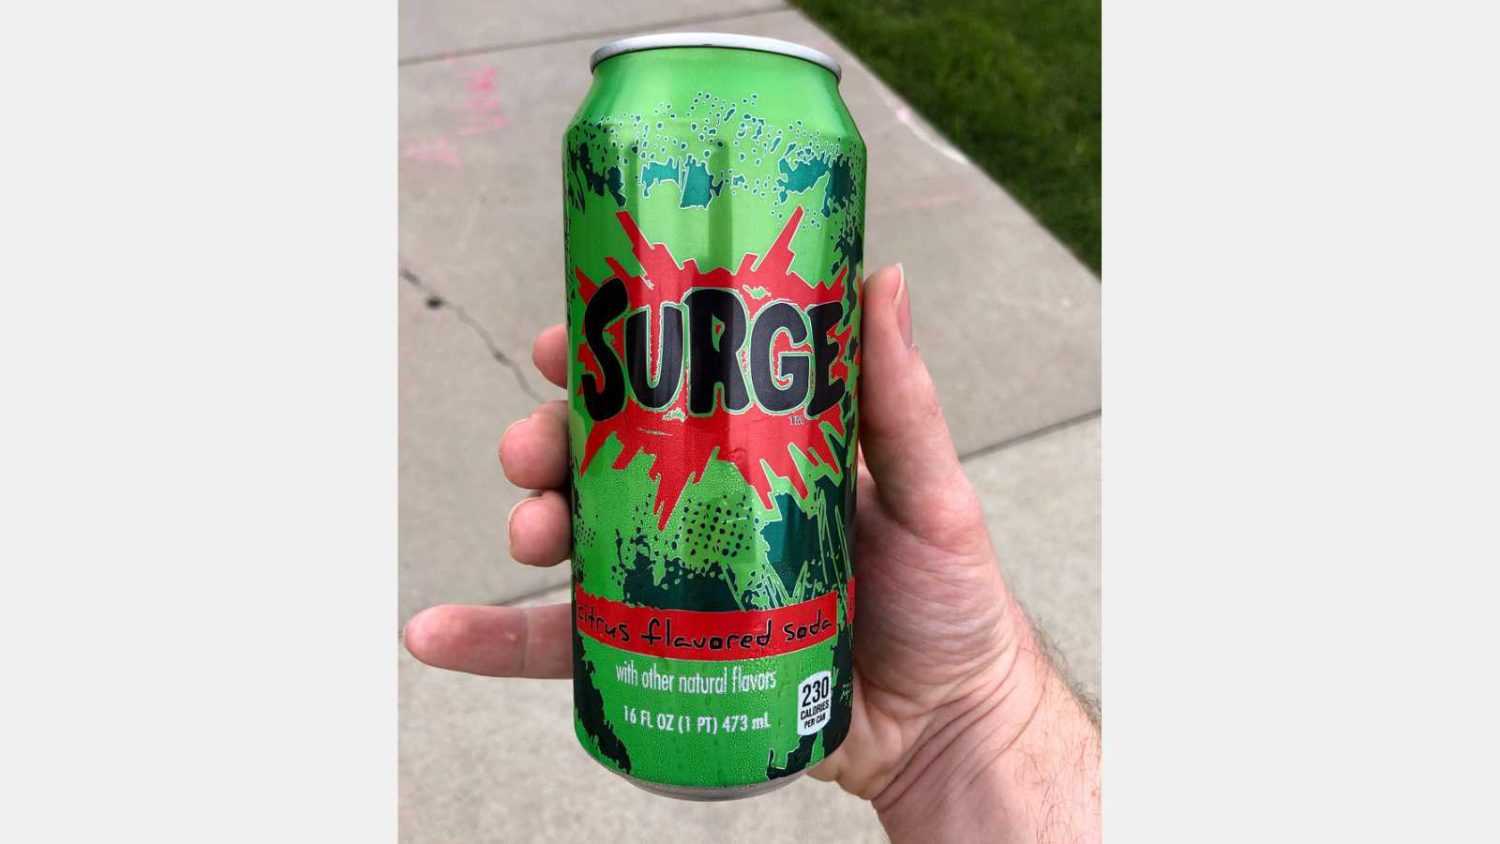 Bloomington, MN/USA - July 1, 2020: Surge soda can being enjoyed by someone outdoors.